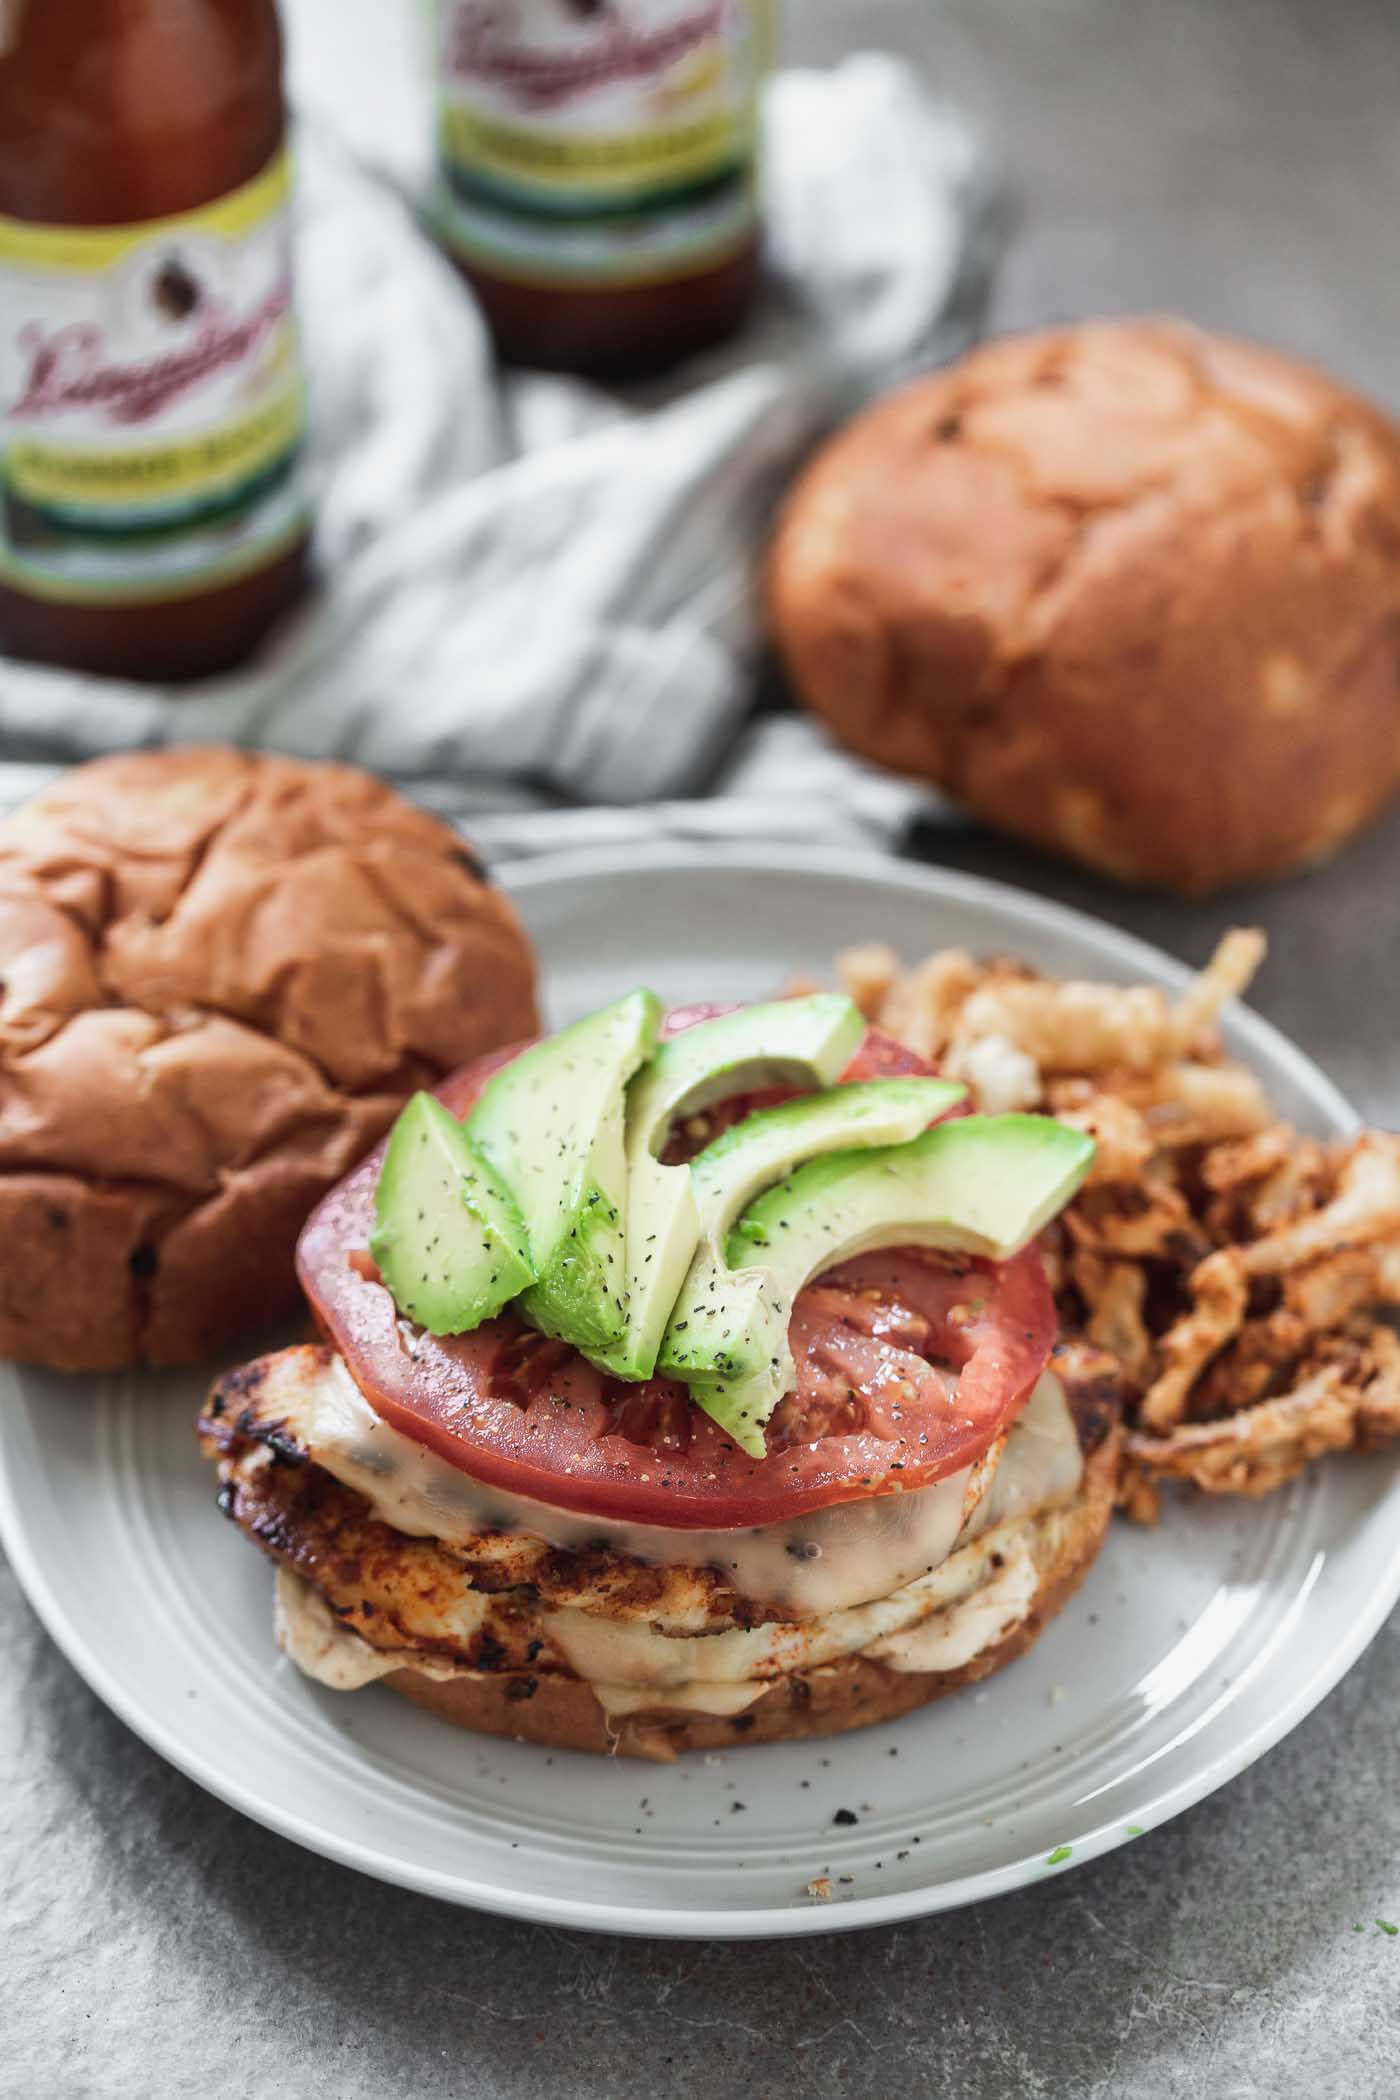 Blackened Chicken Sandwiches with Chipotle Mayo and Gouda